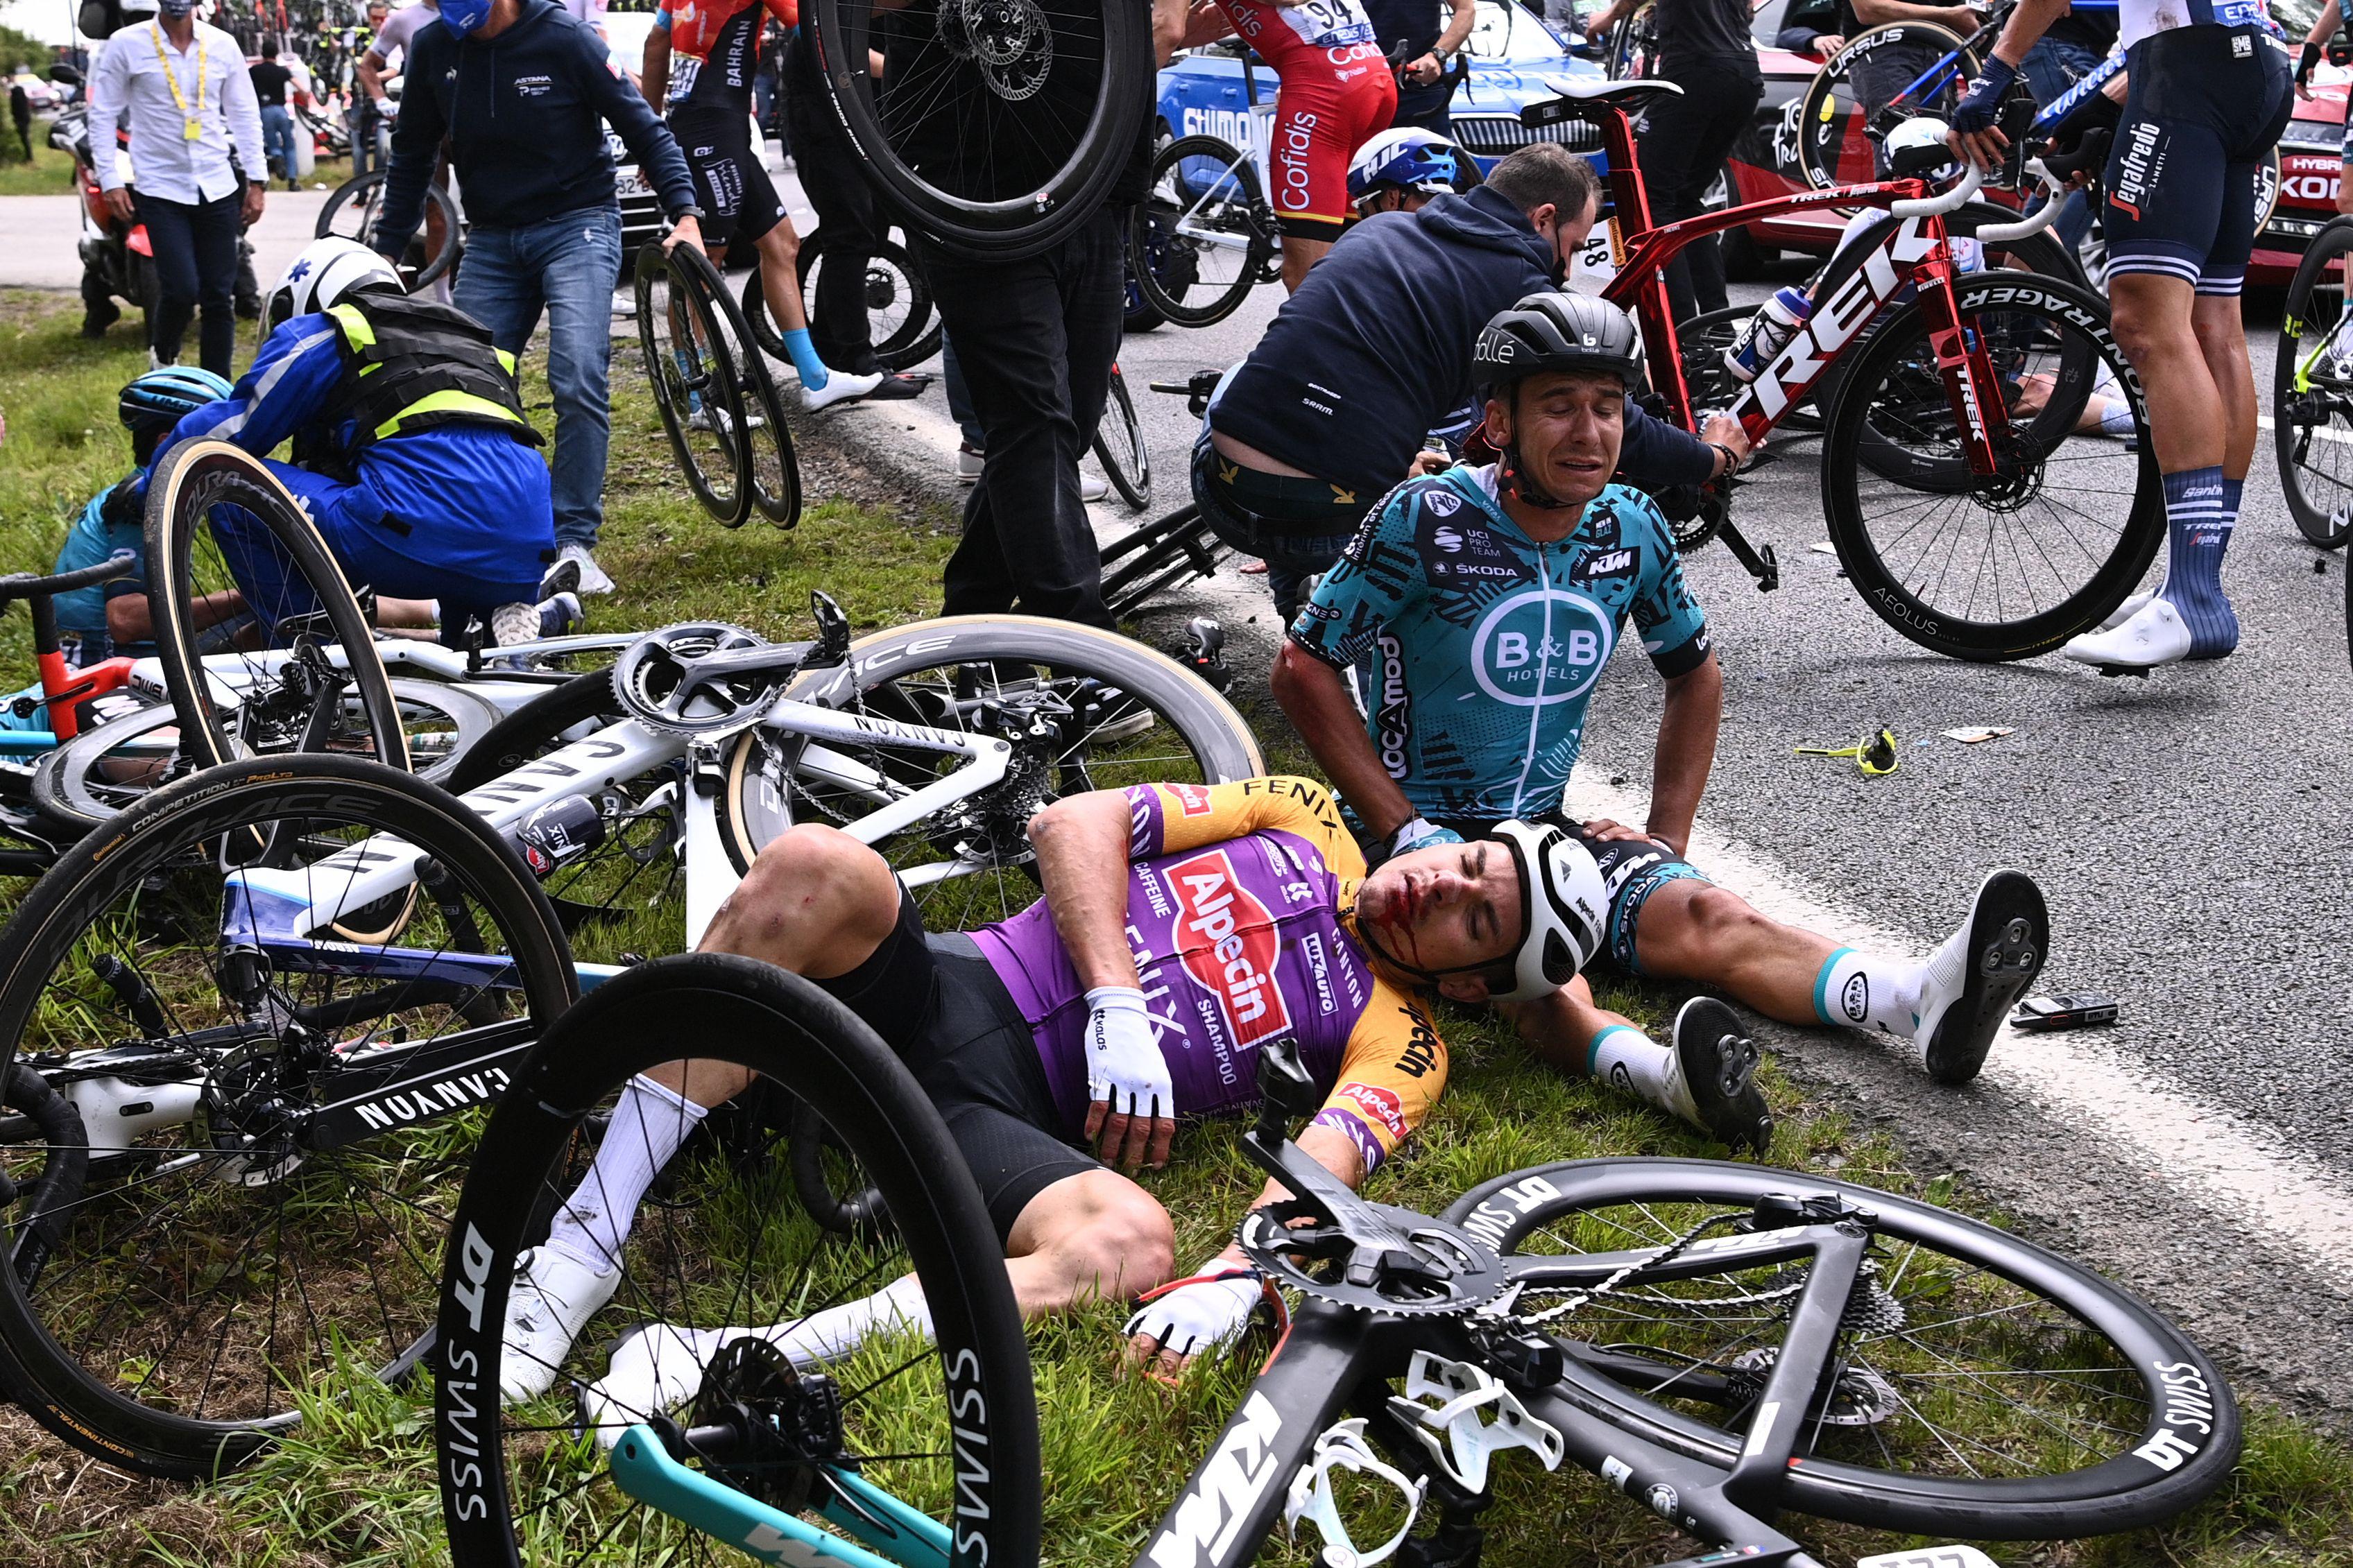 Riders side and lay on the ground besides their crashed bikes.